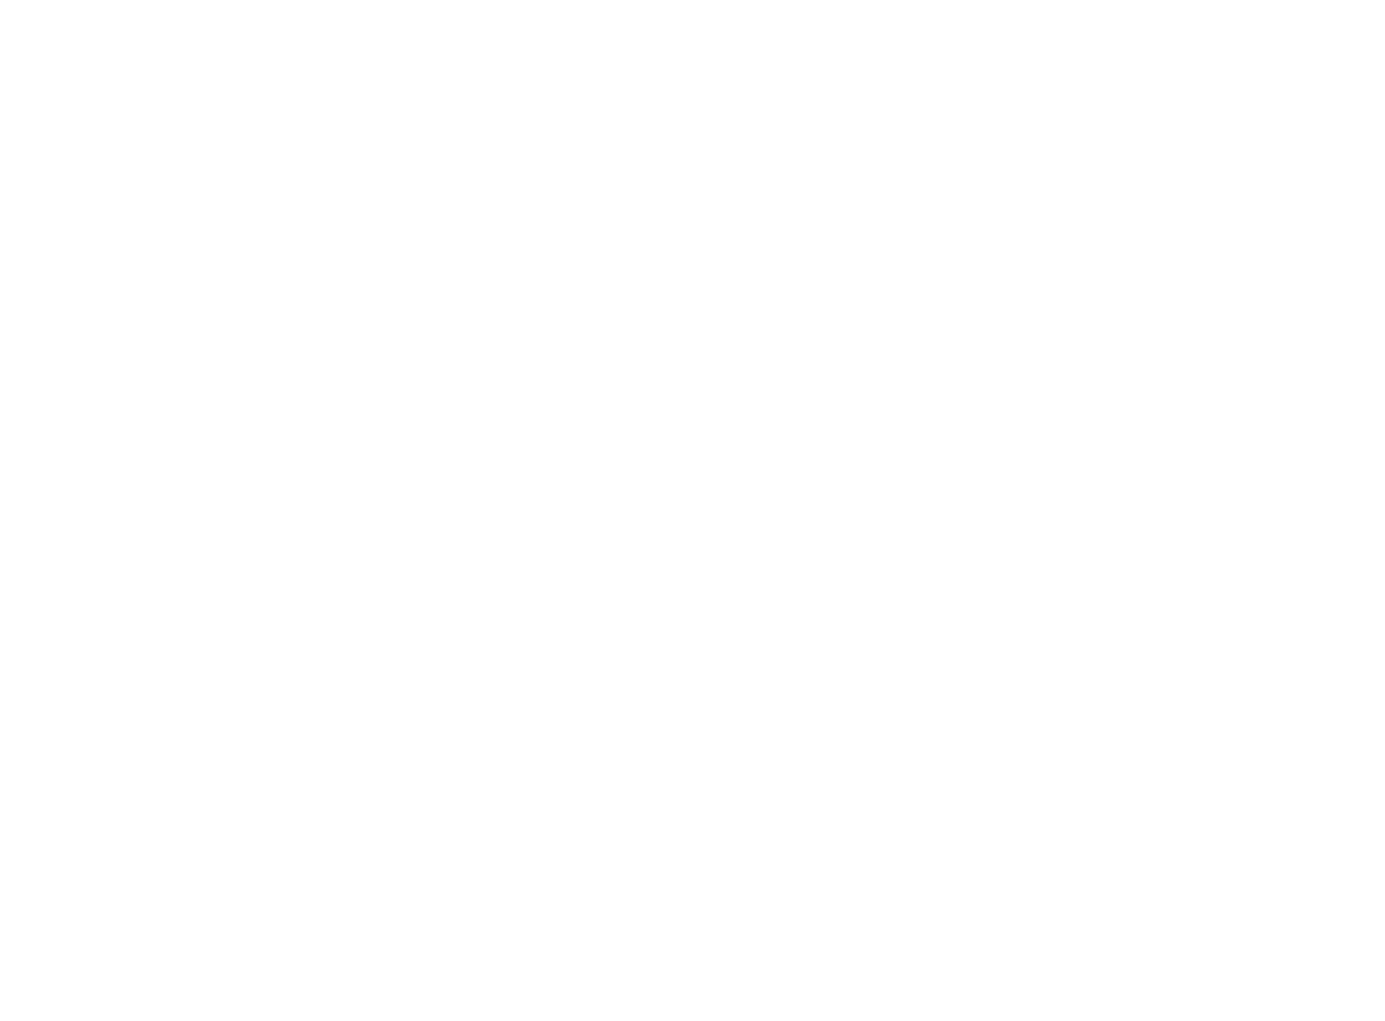 Christmas in July Festival